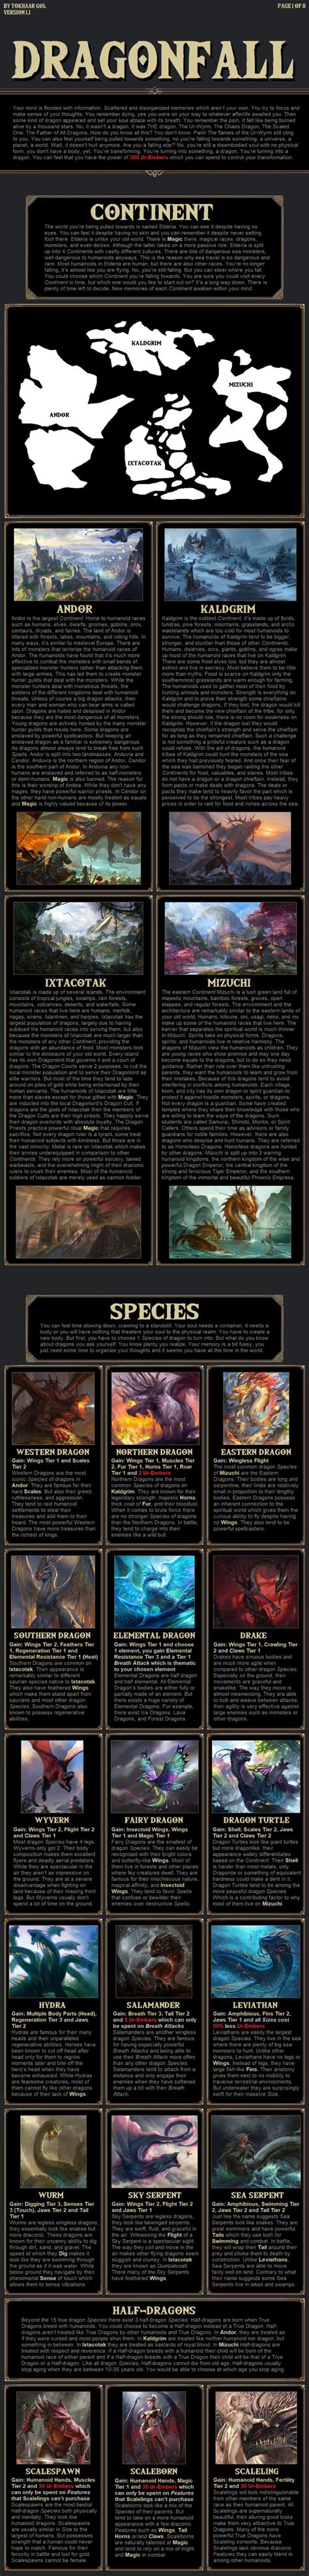 Dragonfall V By Tokhaar Gol Makeyourchoice Cyoa Create Your